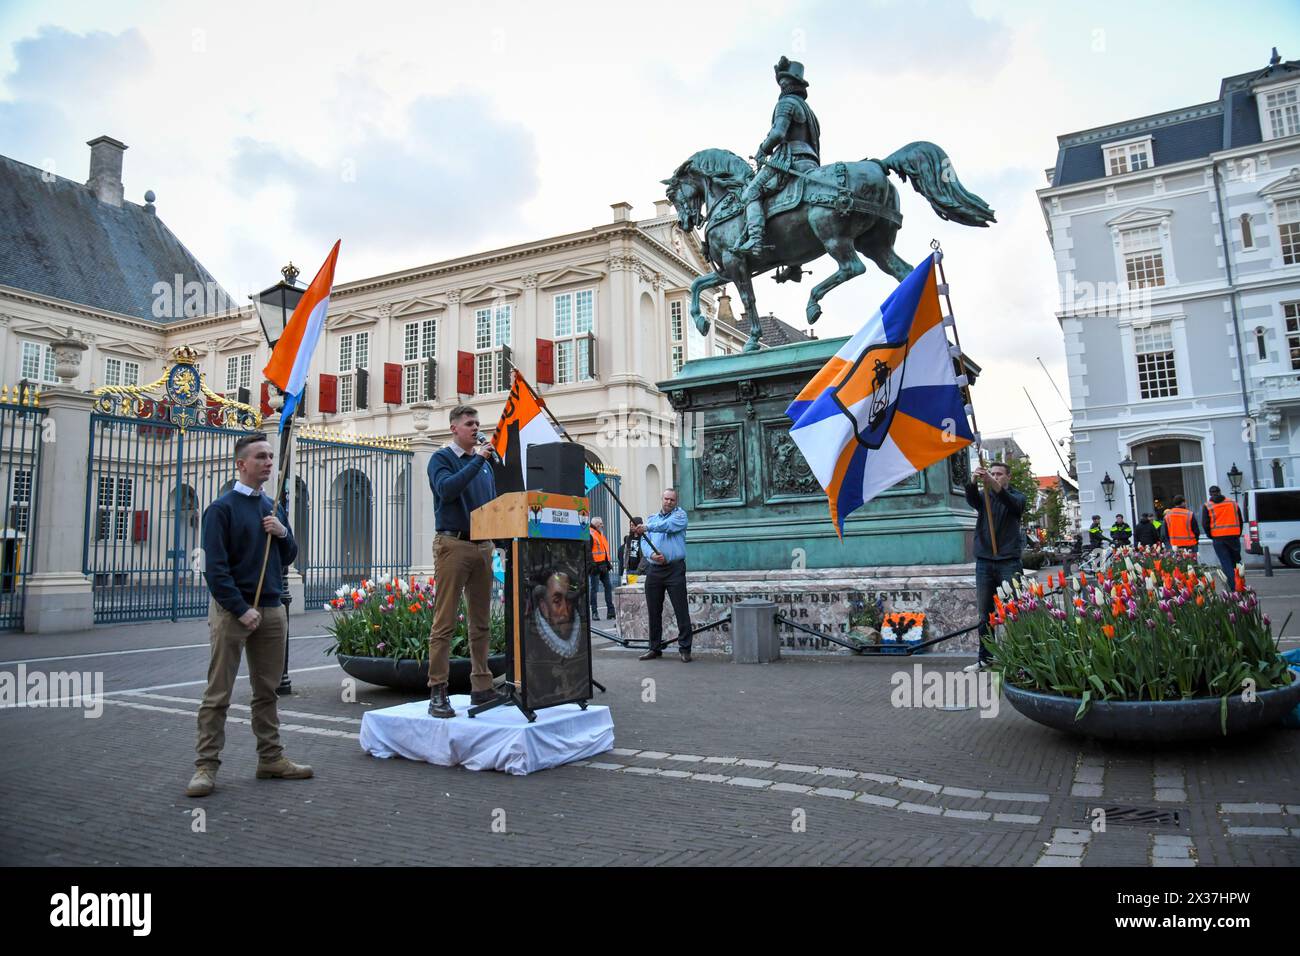 04-24-2024.The Hague,The Netherlands.Dutch Belgian conservative right wing groups 'Voorpost','Geuzenbond' and 'Schild en vrienden' held a ceremony at the statue of William of Orange.They laid flowers and speaches were given.There was a small counterprotest, but they were kept apart by police. Stock Photo